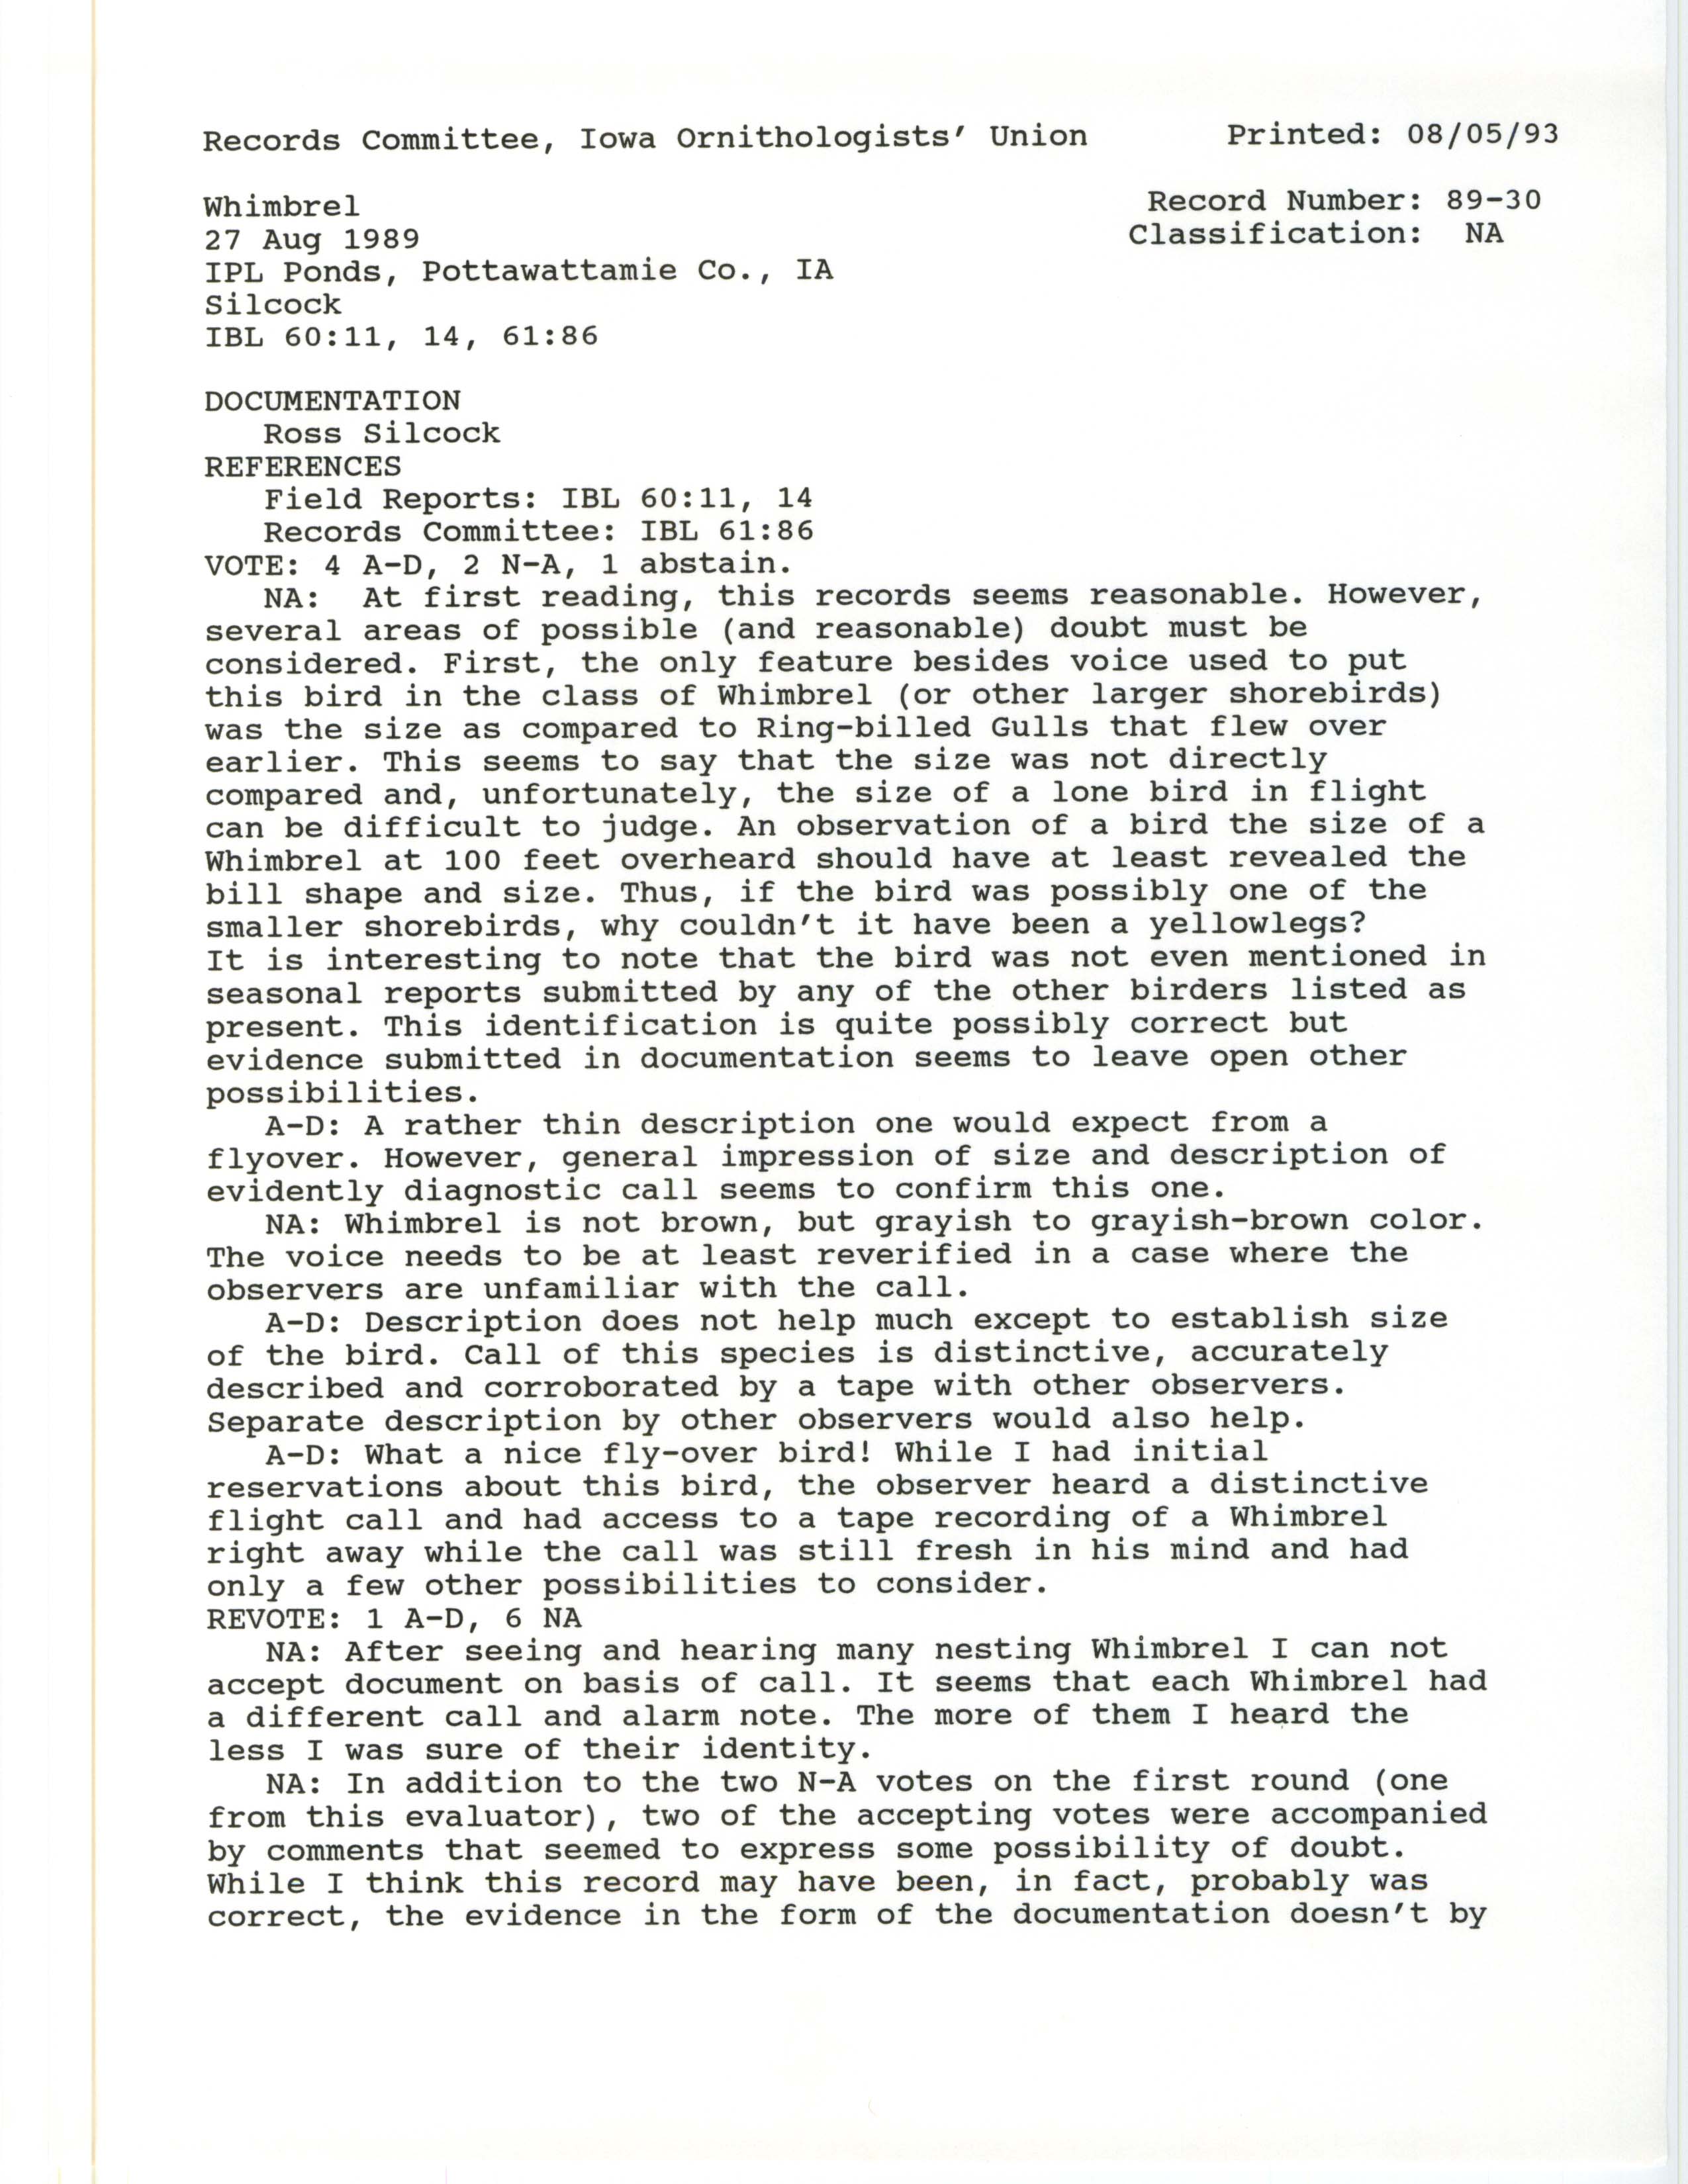 Records Committee review for rare bird sighting of Whimbrel at the MidAmerican Energy Ponds, 1989